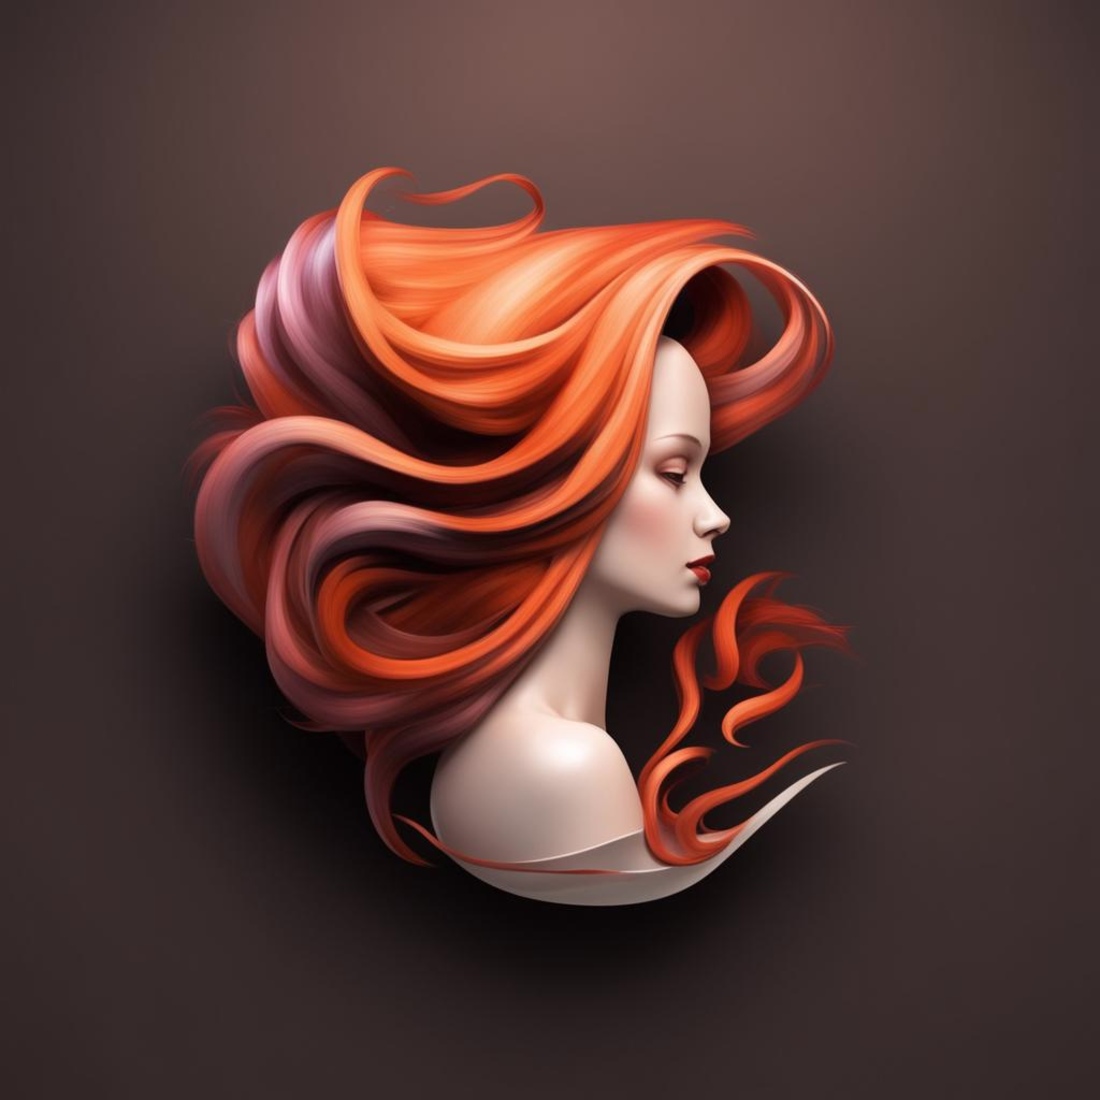 A set of logos on the theme of the Hairdresser cover image.